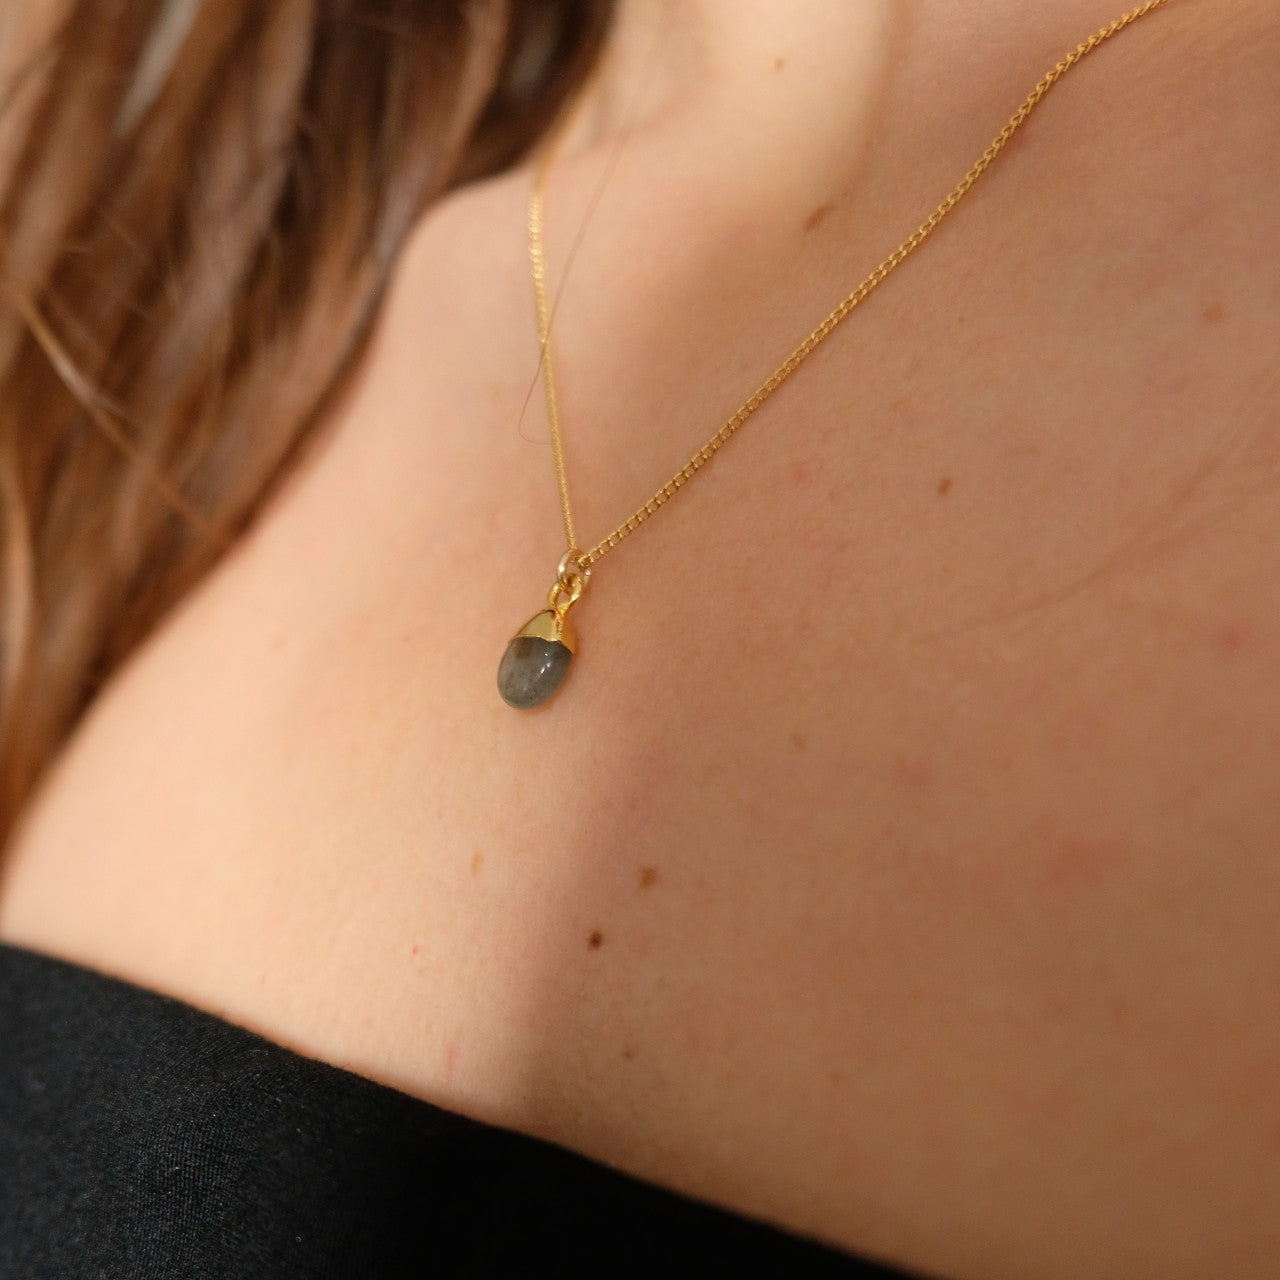 Labradorite Tiny Tumbled Necklace | Adventure (Gold Plated)